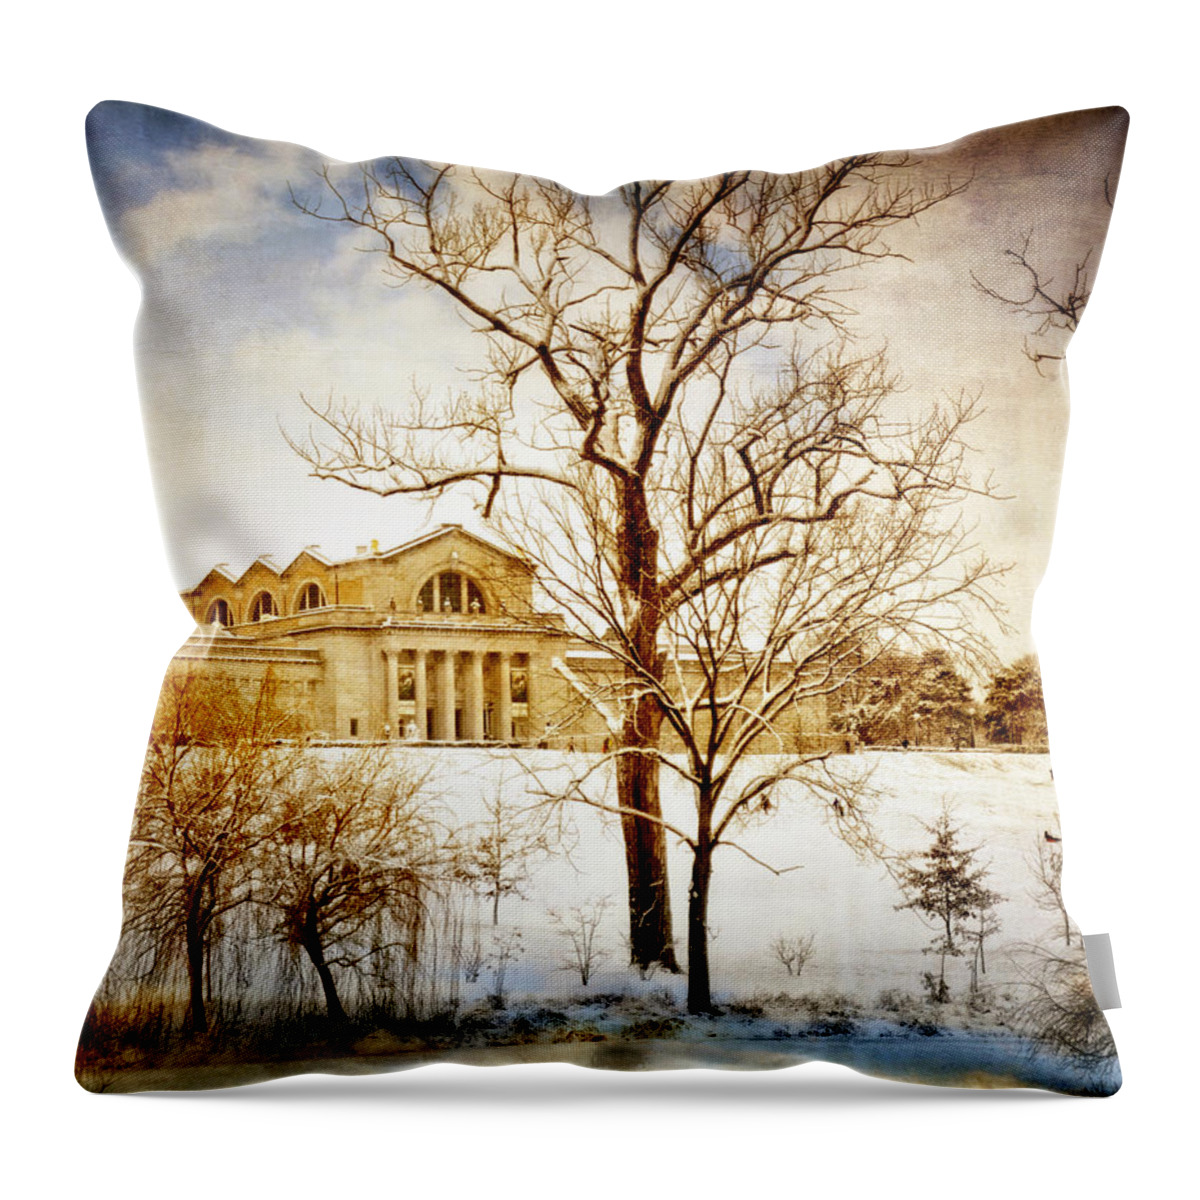 St. Louis Throw Pillow featuring the photograph Winter At The Art Museum by Marty Koch